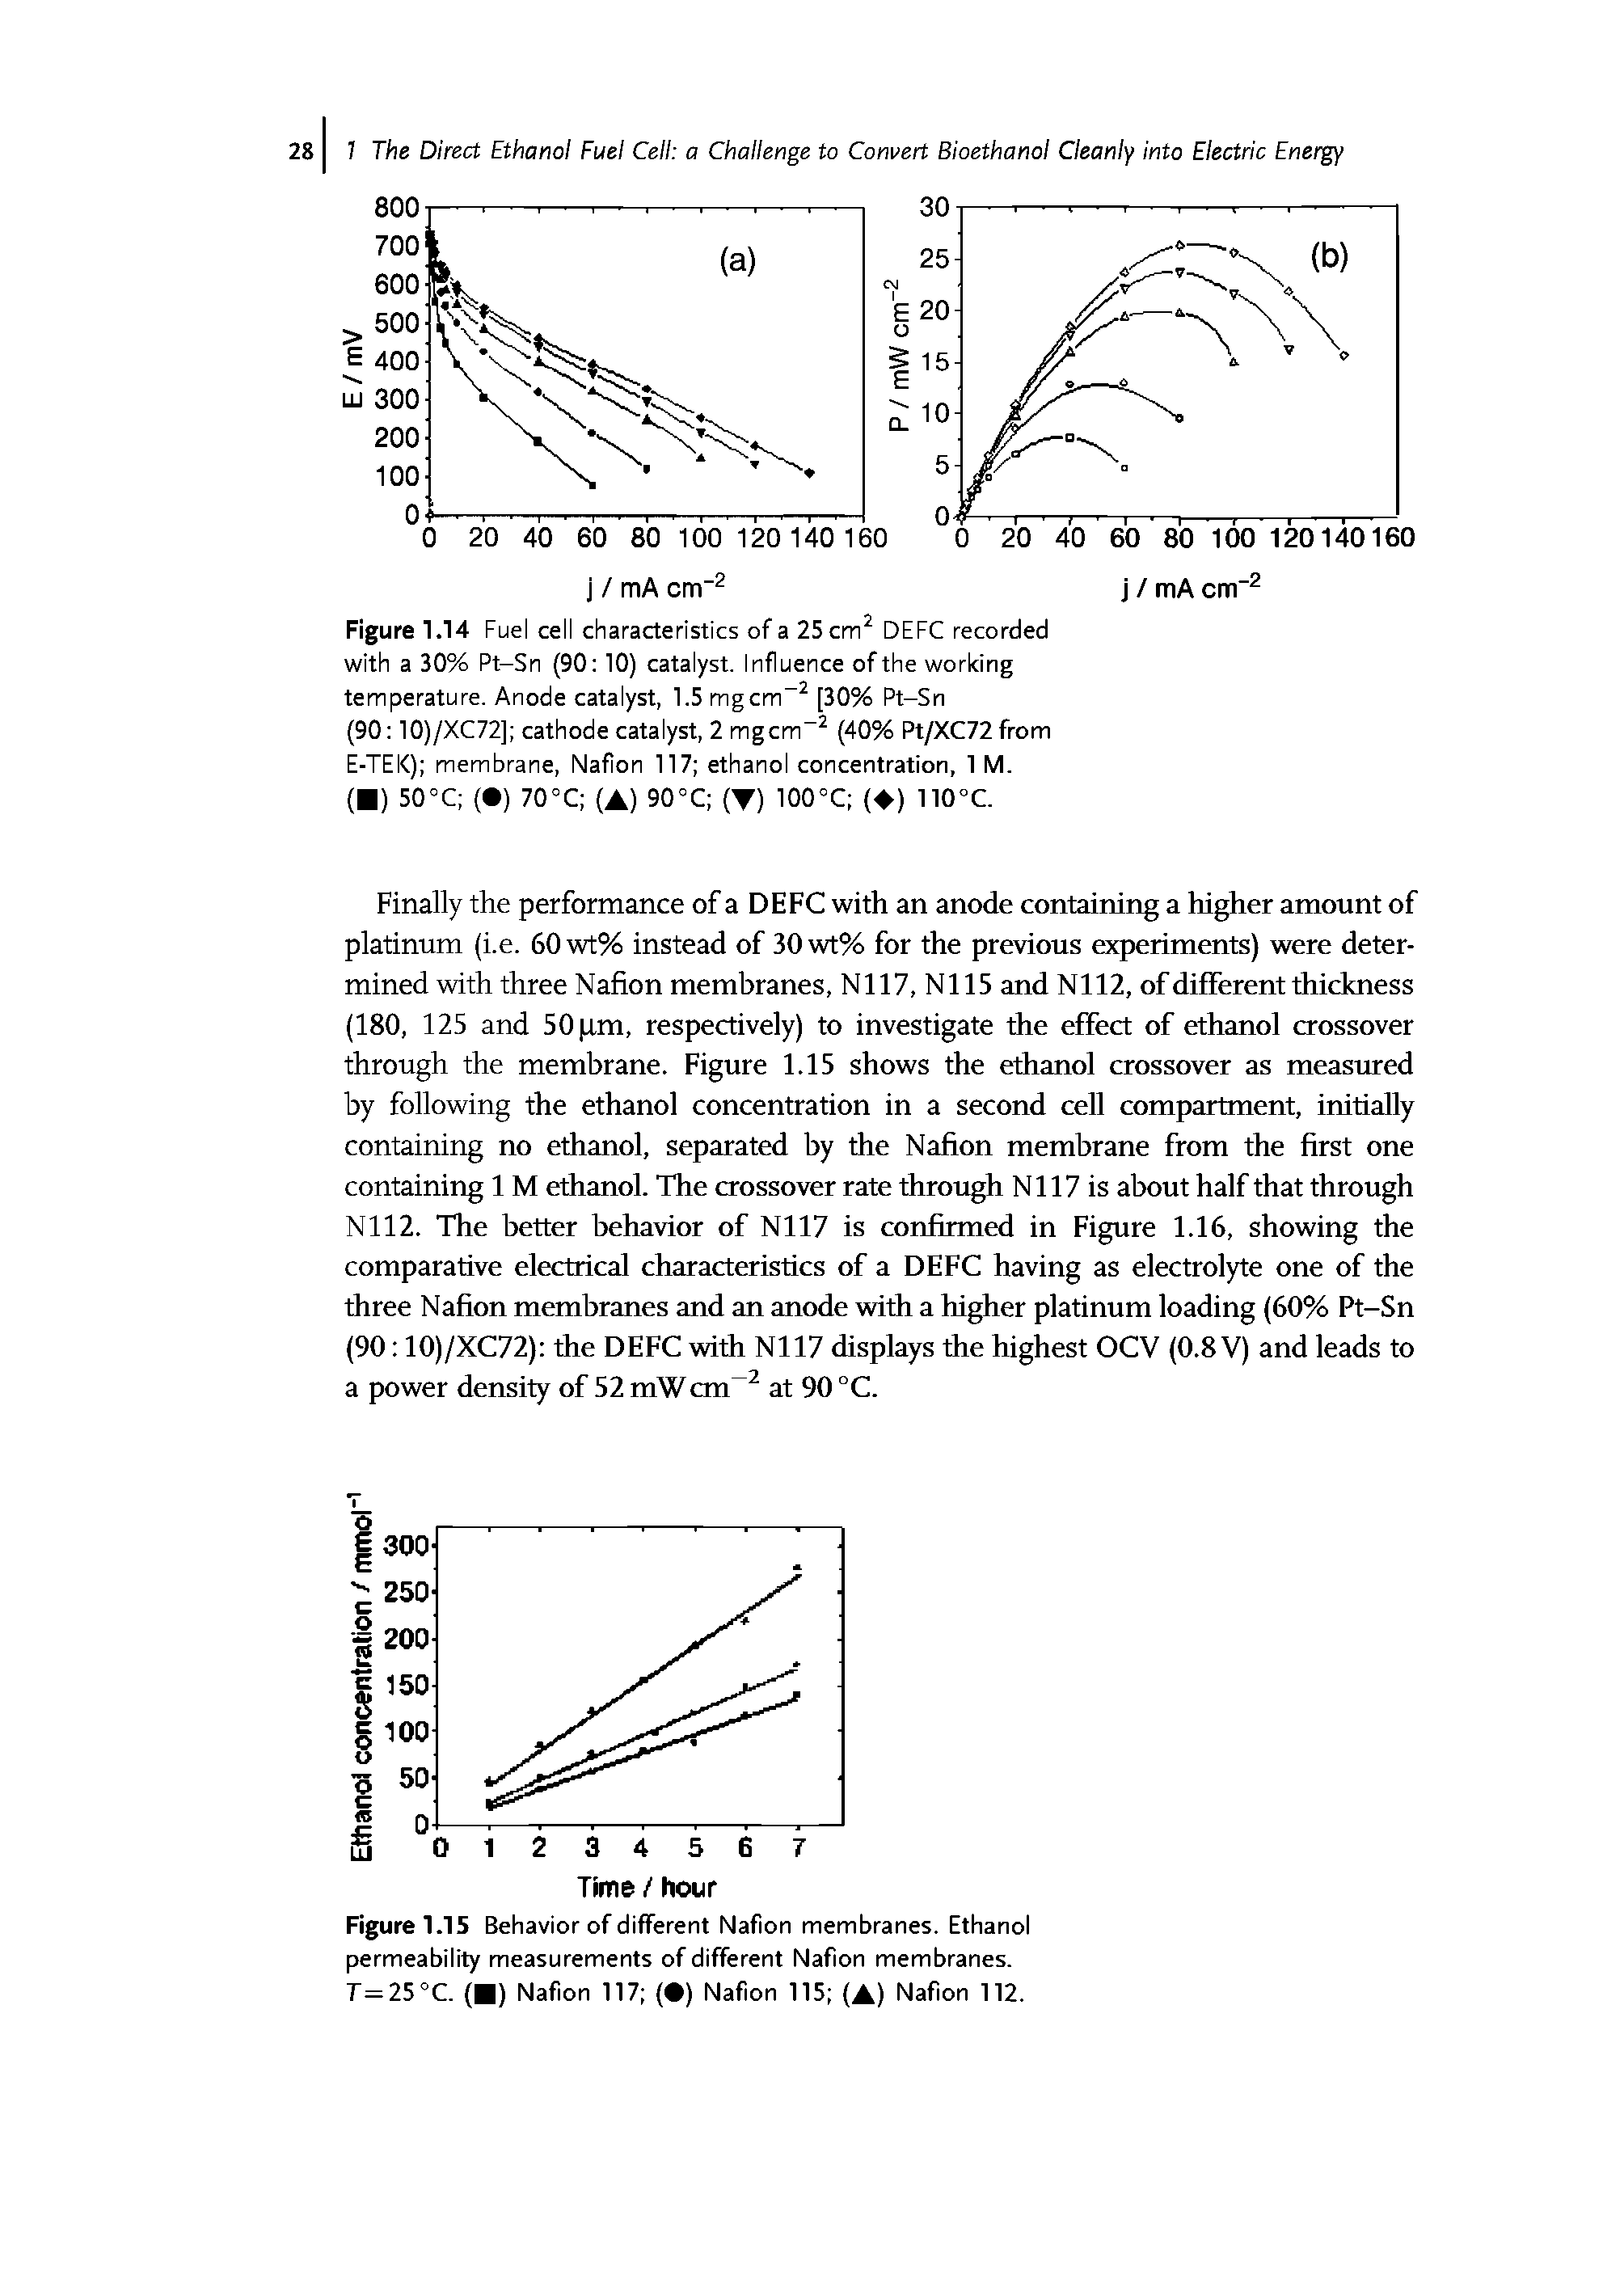 Figure 1.14 Fuel cell characteristics of a 25 cm DEFC recorded with a 30% Pt-Sn (90 10) catalyst. Influence of the working temperature. Anode catalyst, 1.5 mgcrn [30% Pt-Sn (90 10)/XC72] cathode catalyst, 2 mgcm (40% Pt/XC72 from E-TEK) membrane, Nafion 117 ethanol concentration, 1 M. ( ) 50°C ( ) 70°C (A) 90°C (T) 100°C ( ) 110°C.